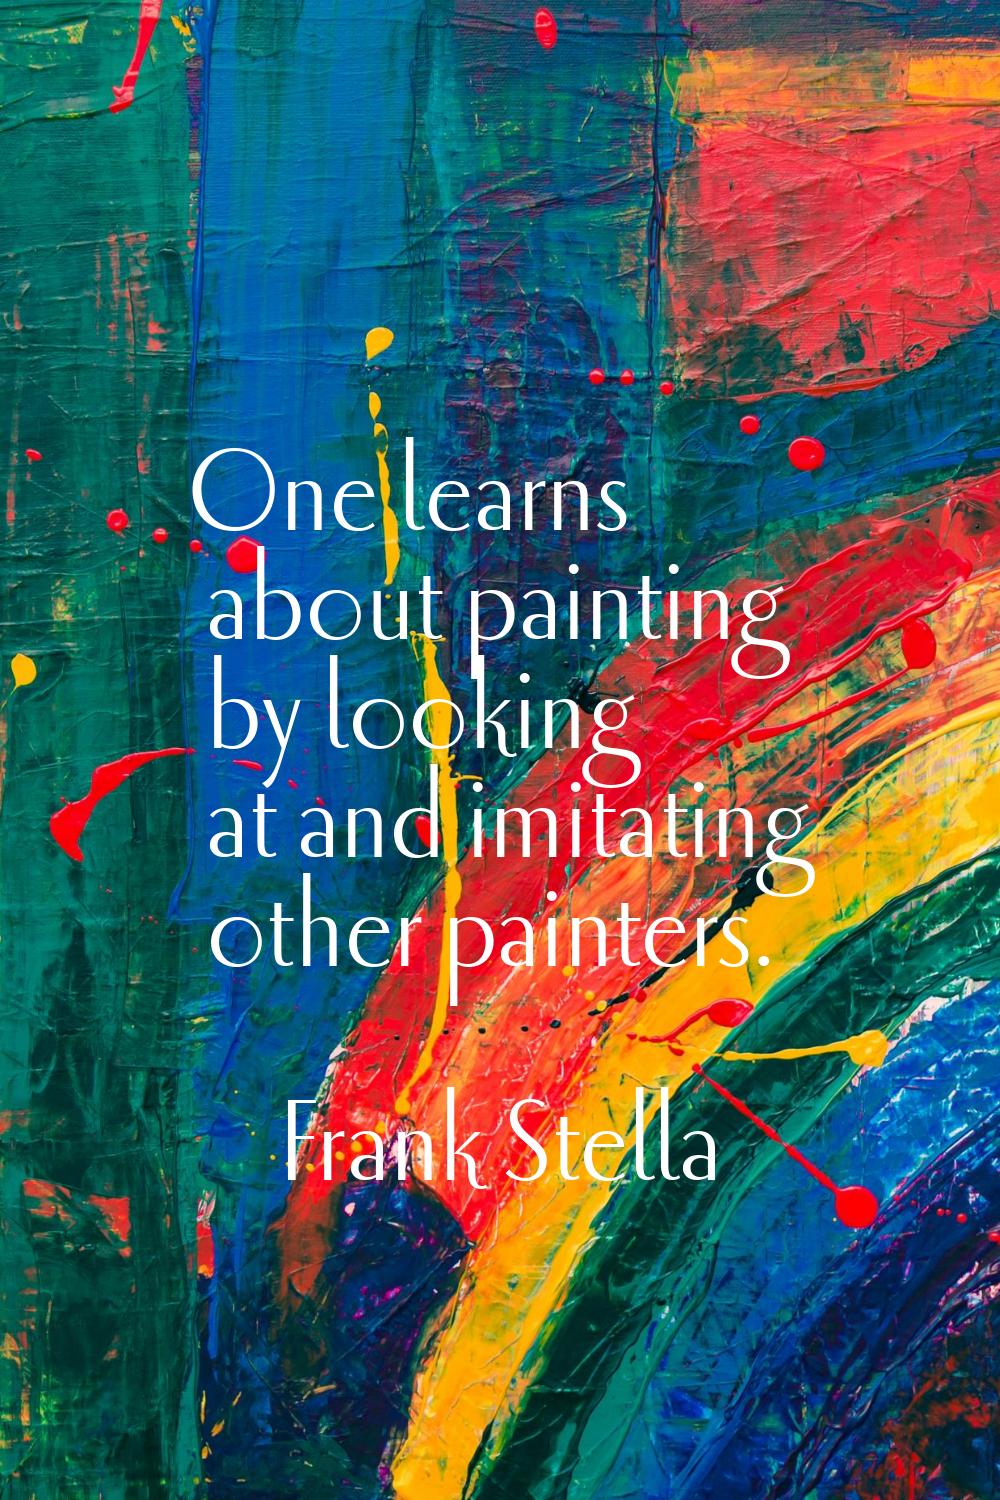 One learns about painting by looking at and imitating other painters.